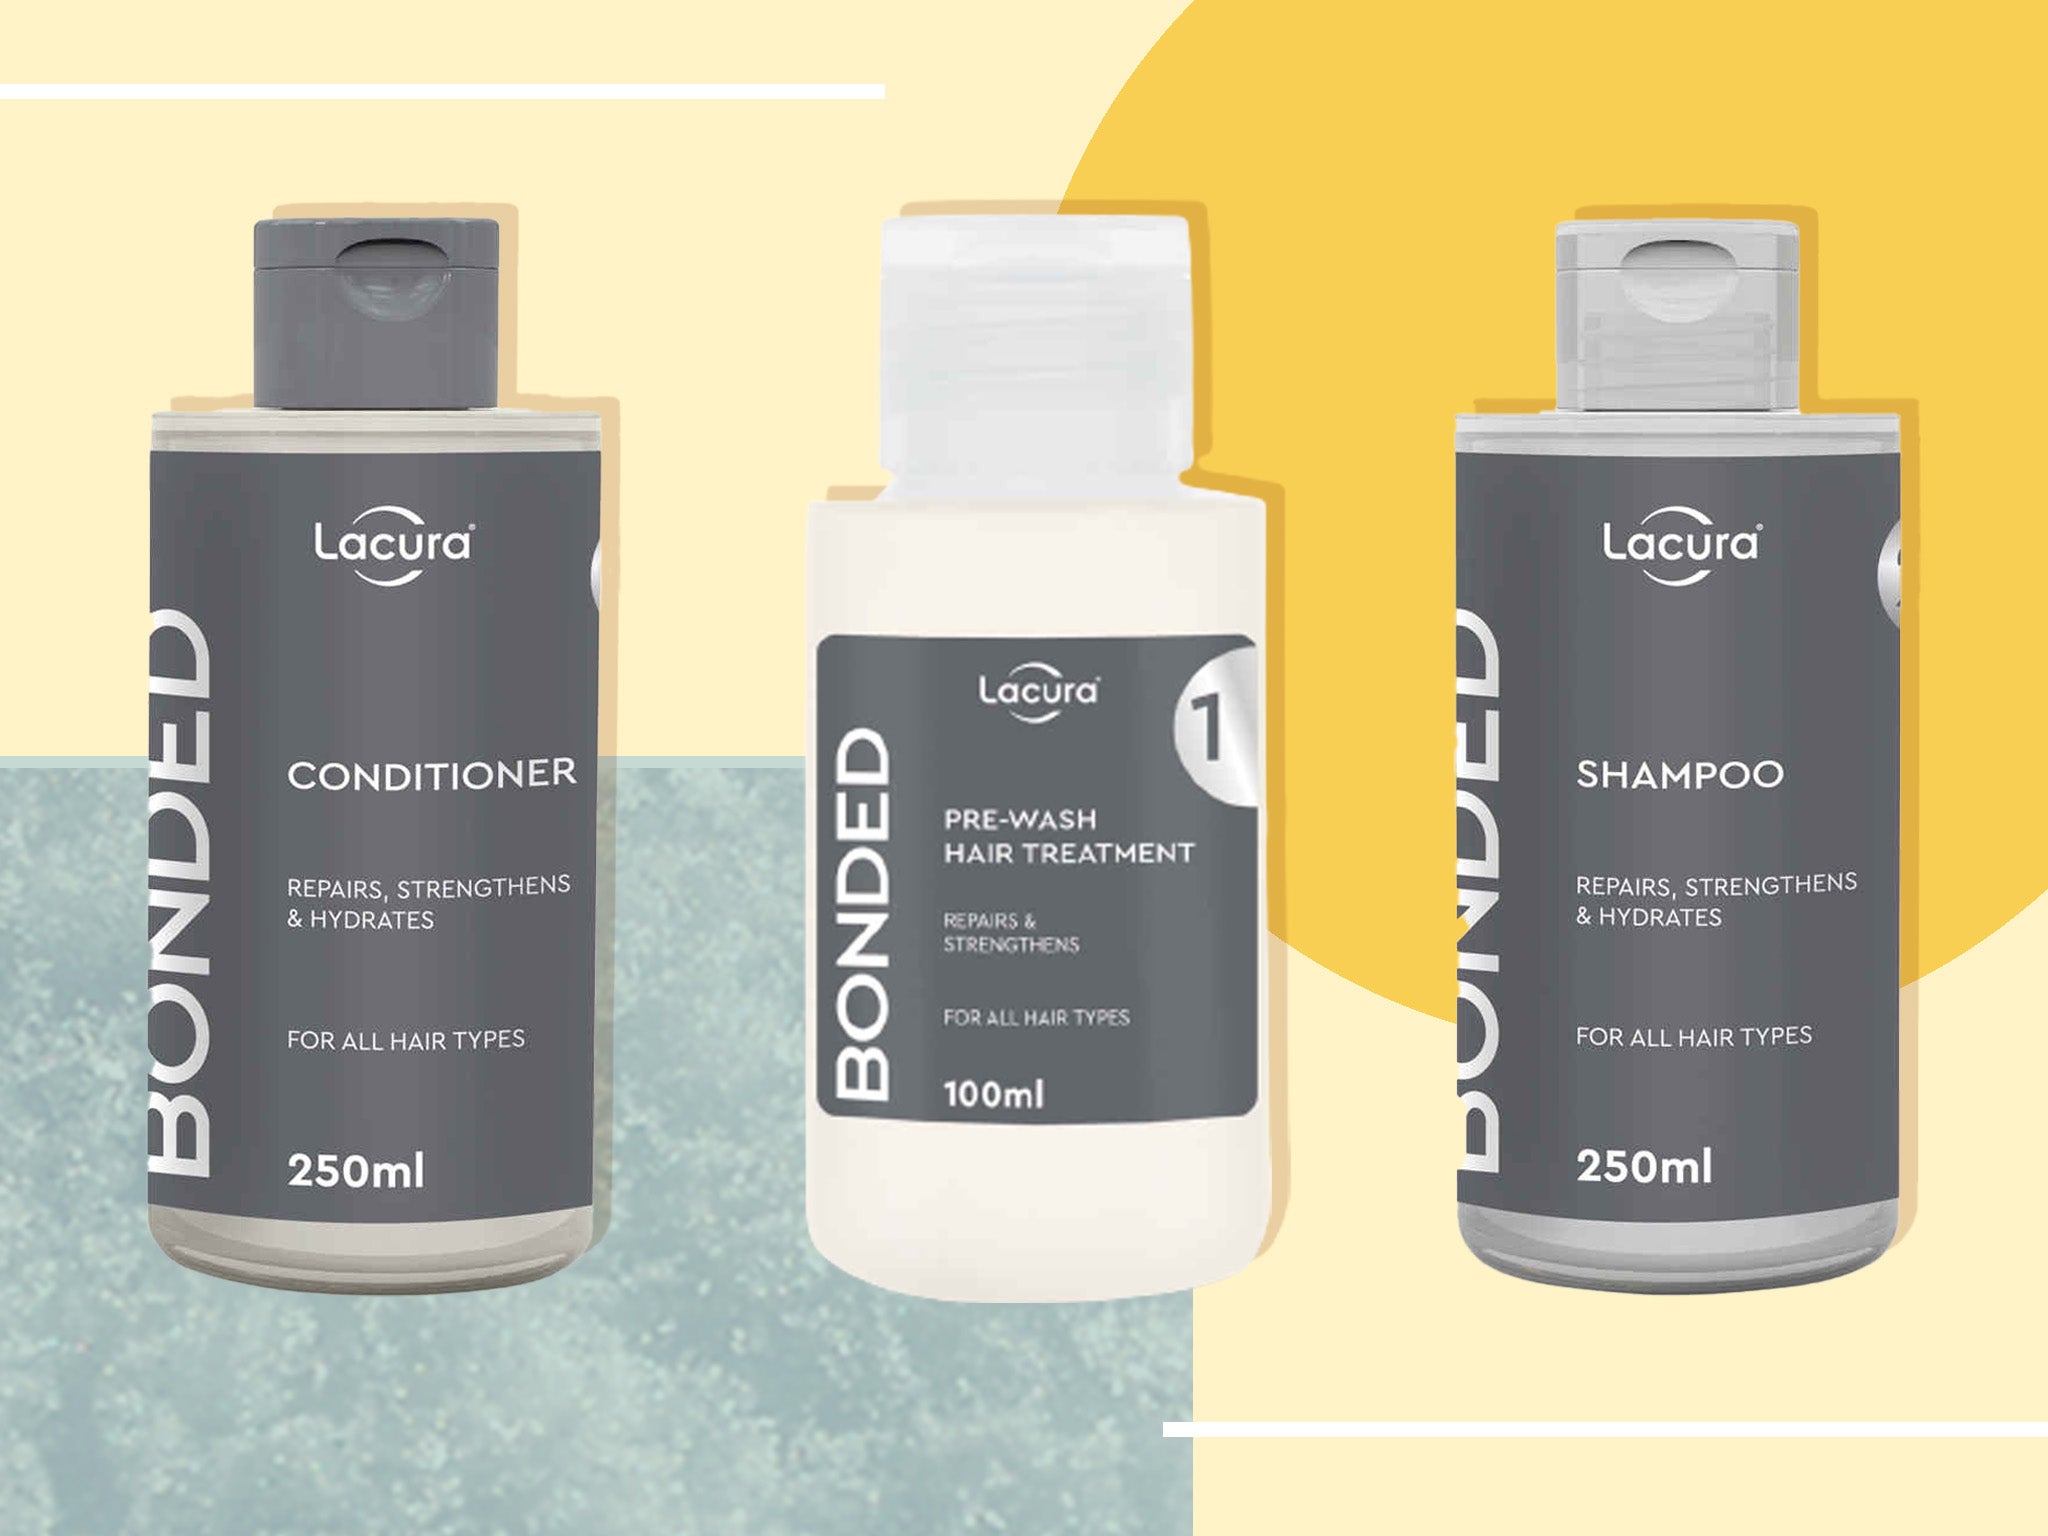 How does Aldi’s £10.50 haircare range compare with Olaplex’s £78 at-home treatments?